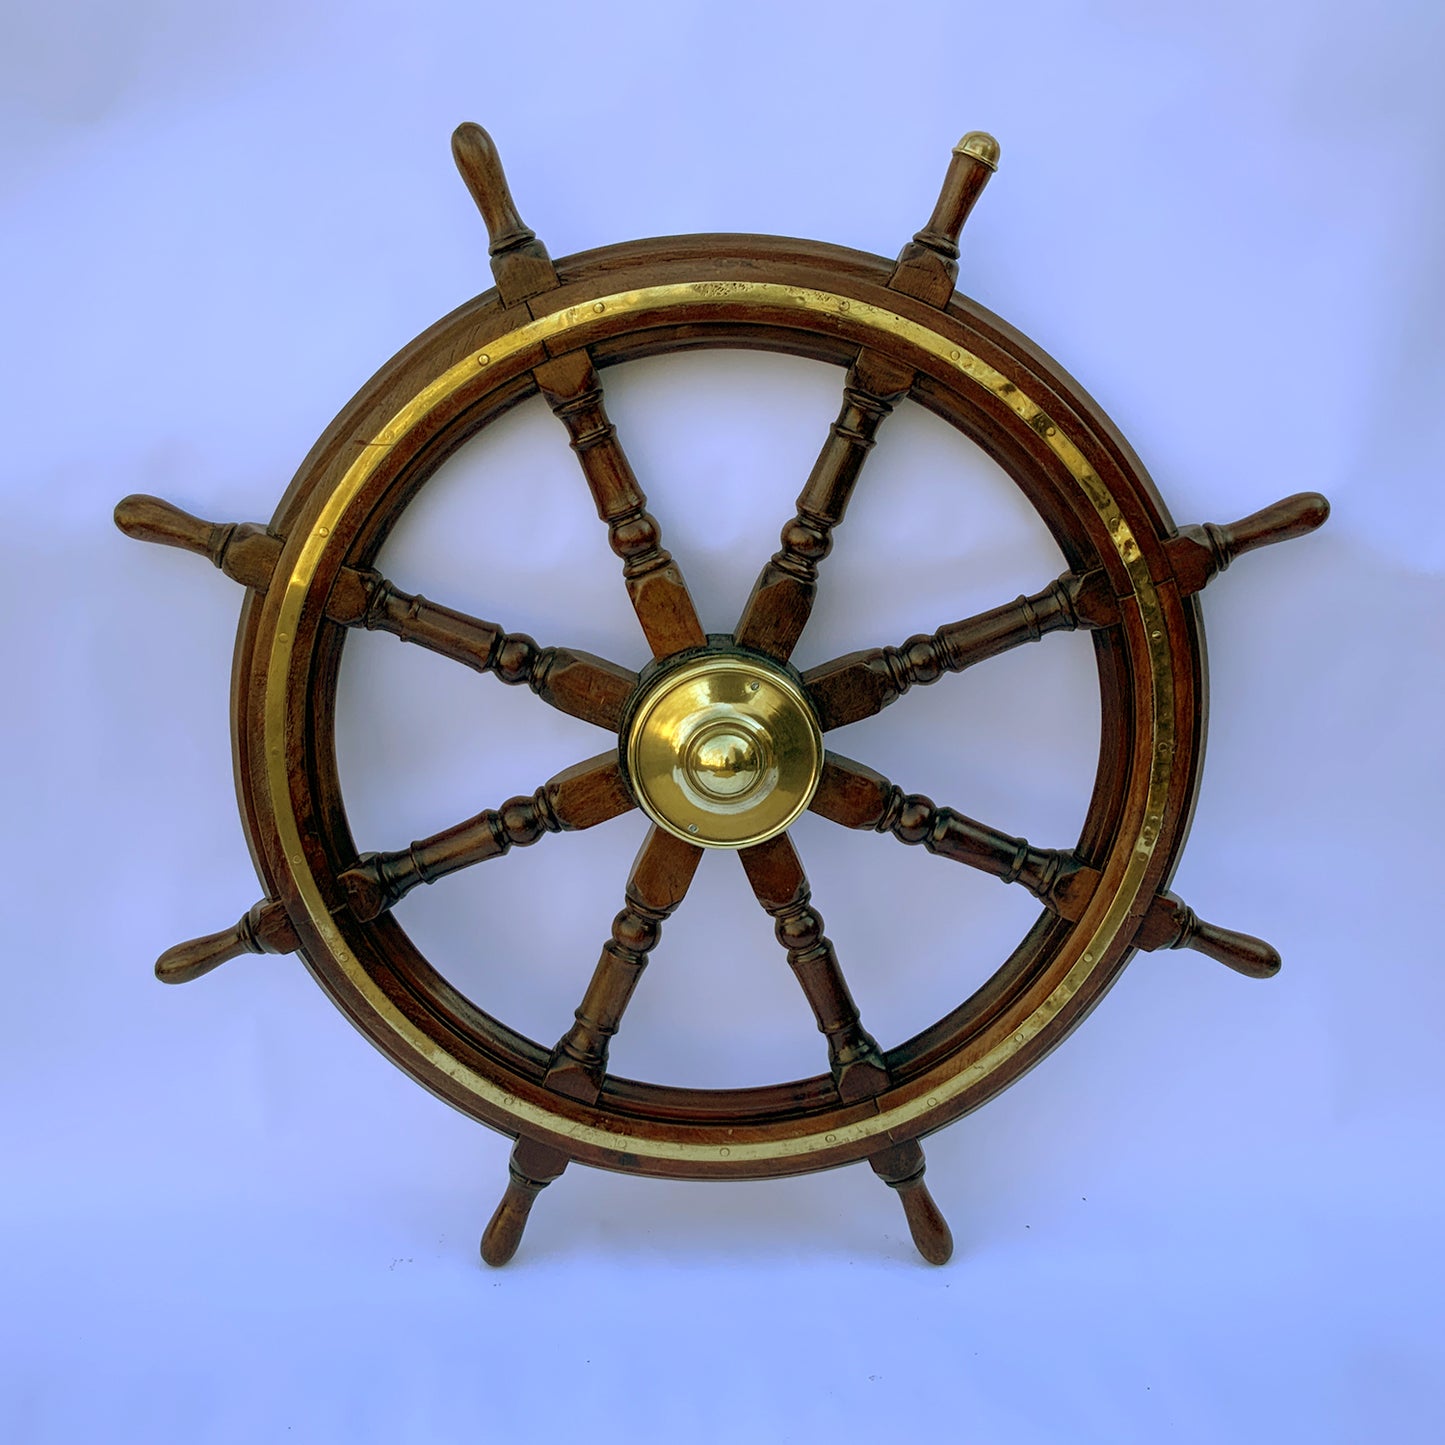 Antique Wood And Brass Ship's Wheel - Lannan Gallery